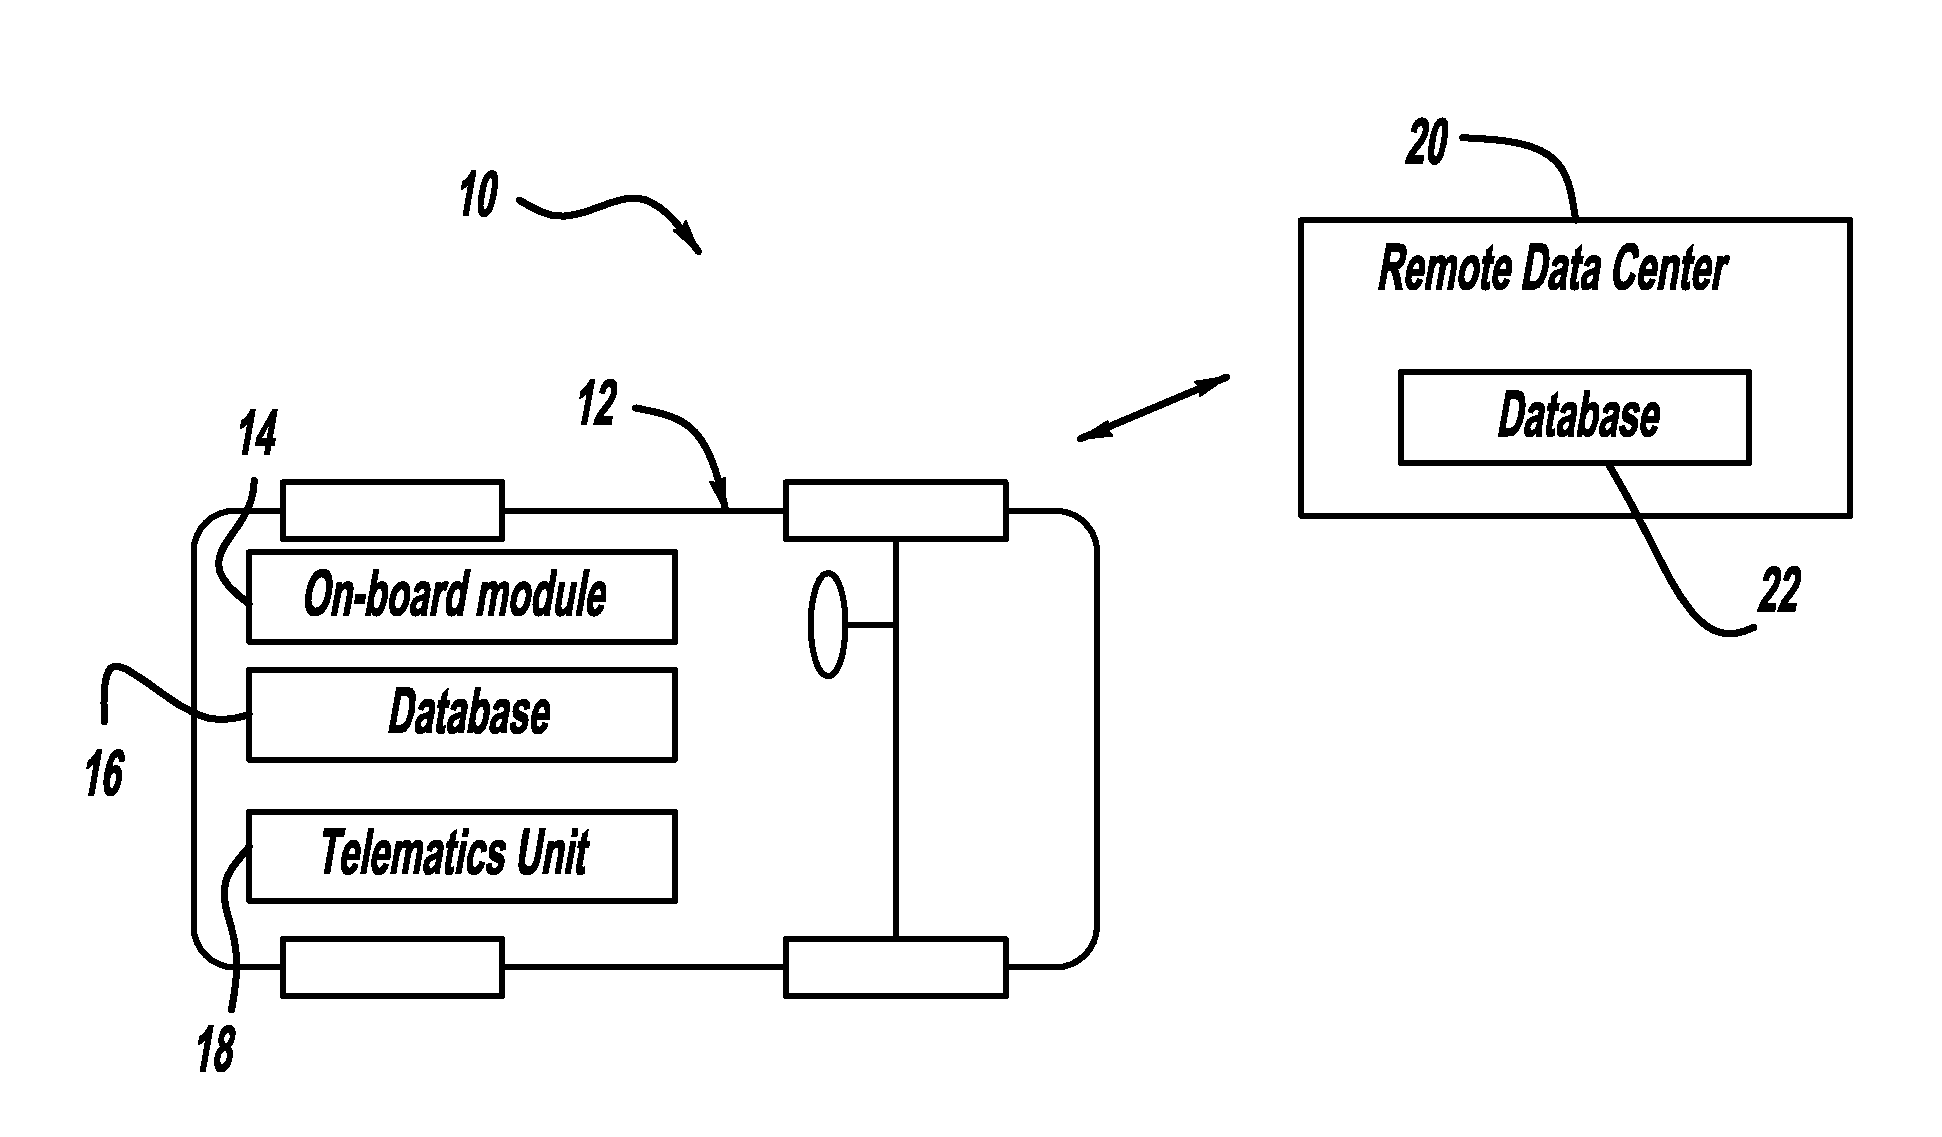 Aggregated information fusion for enhanced diagnostics, prognostics and maintenance practices of vehicles